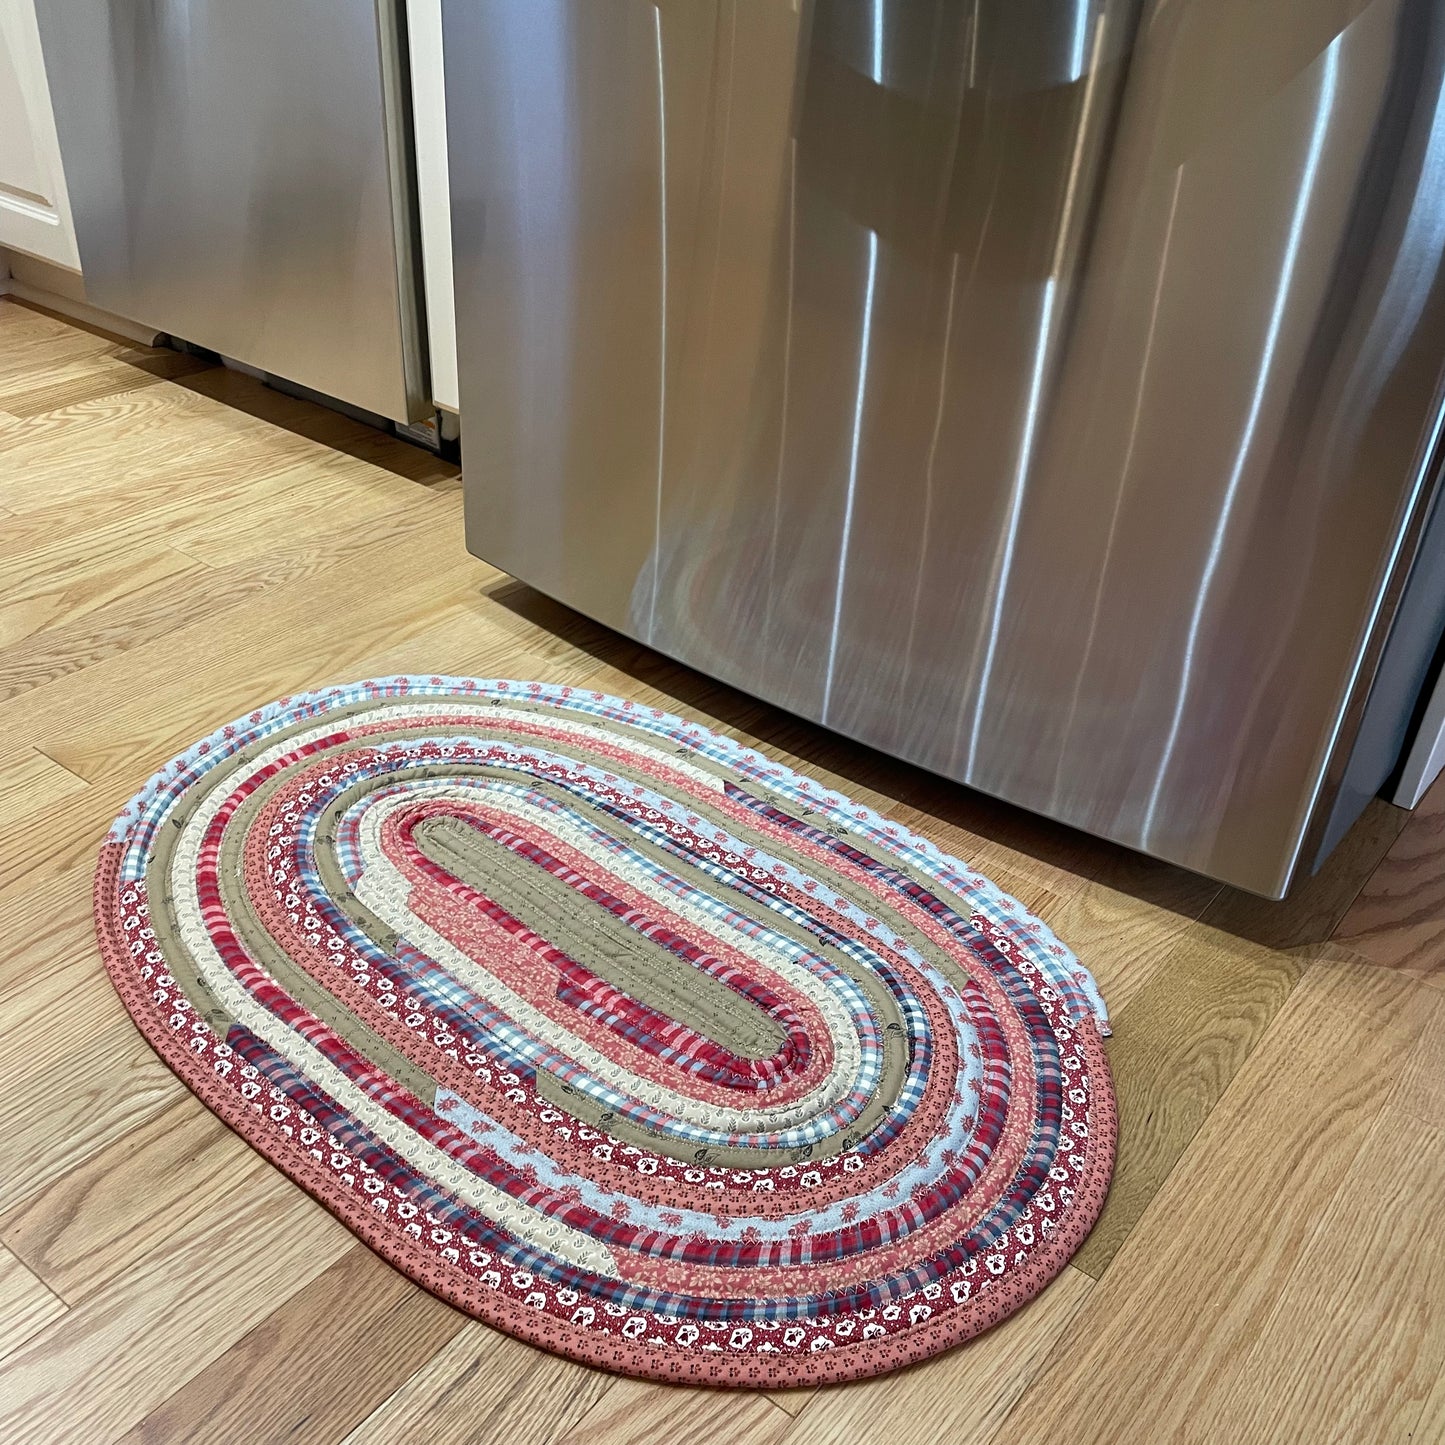 Cute Country Kitchen Sink Accent Rug